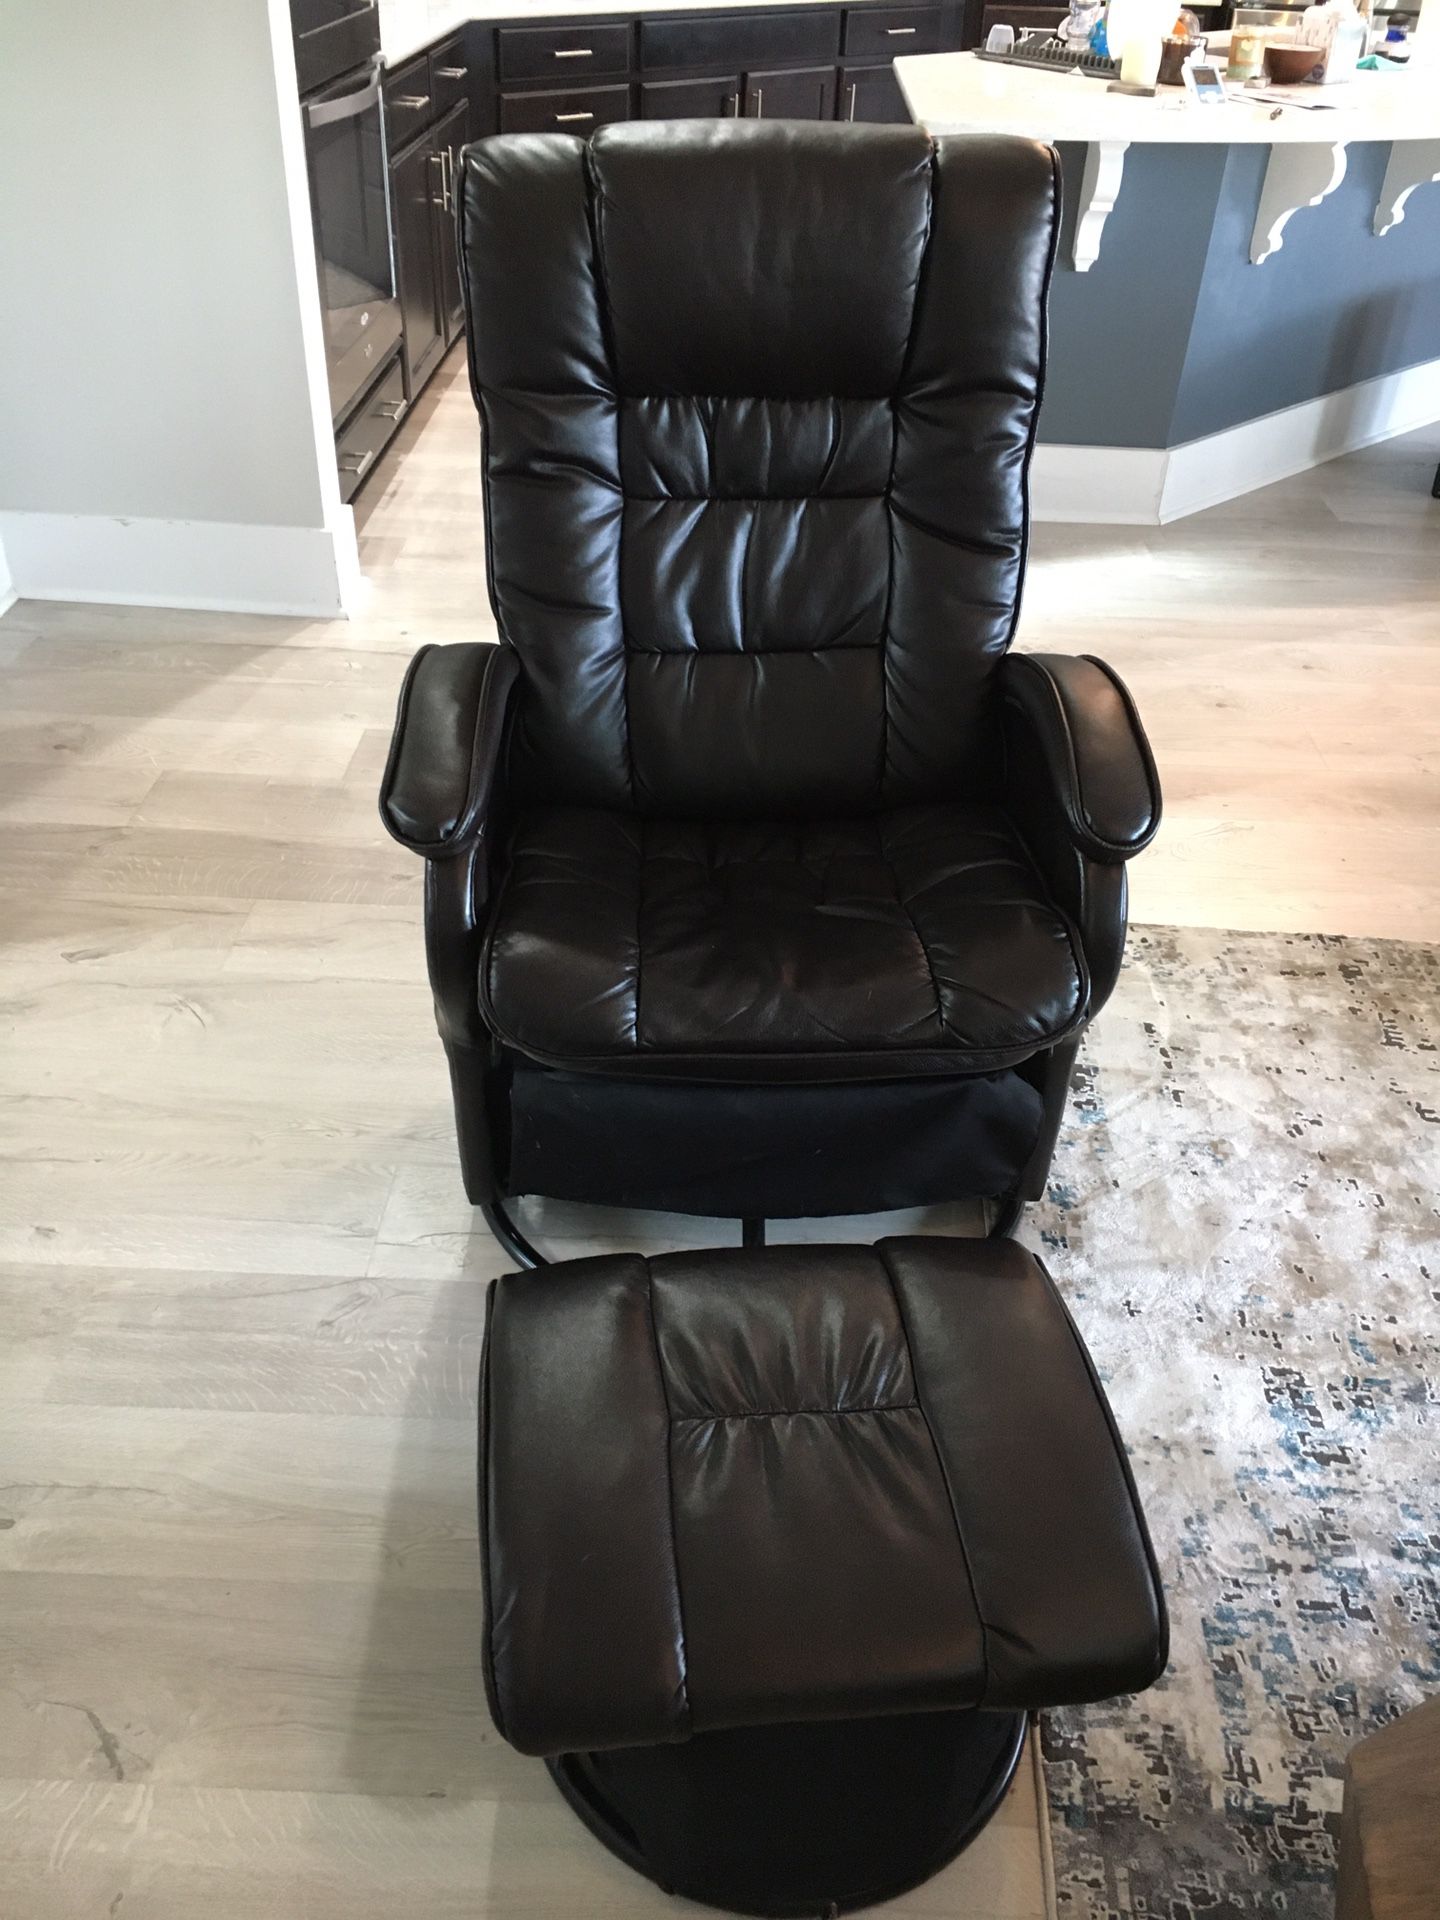 Recliner and ottoman